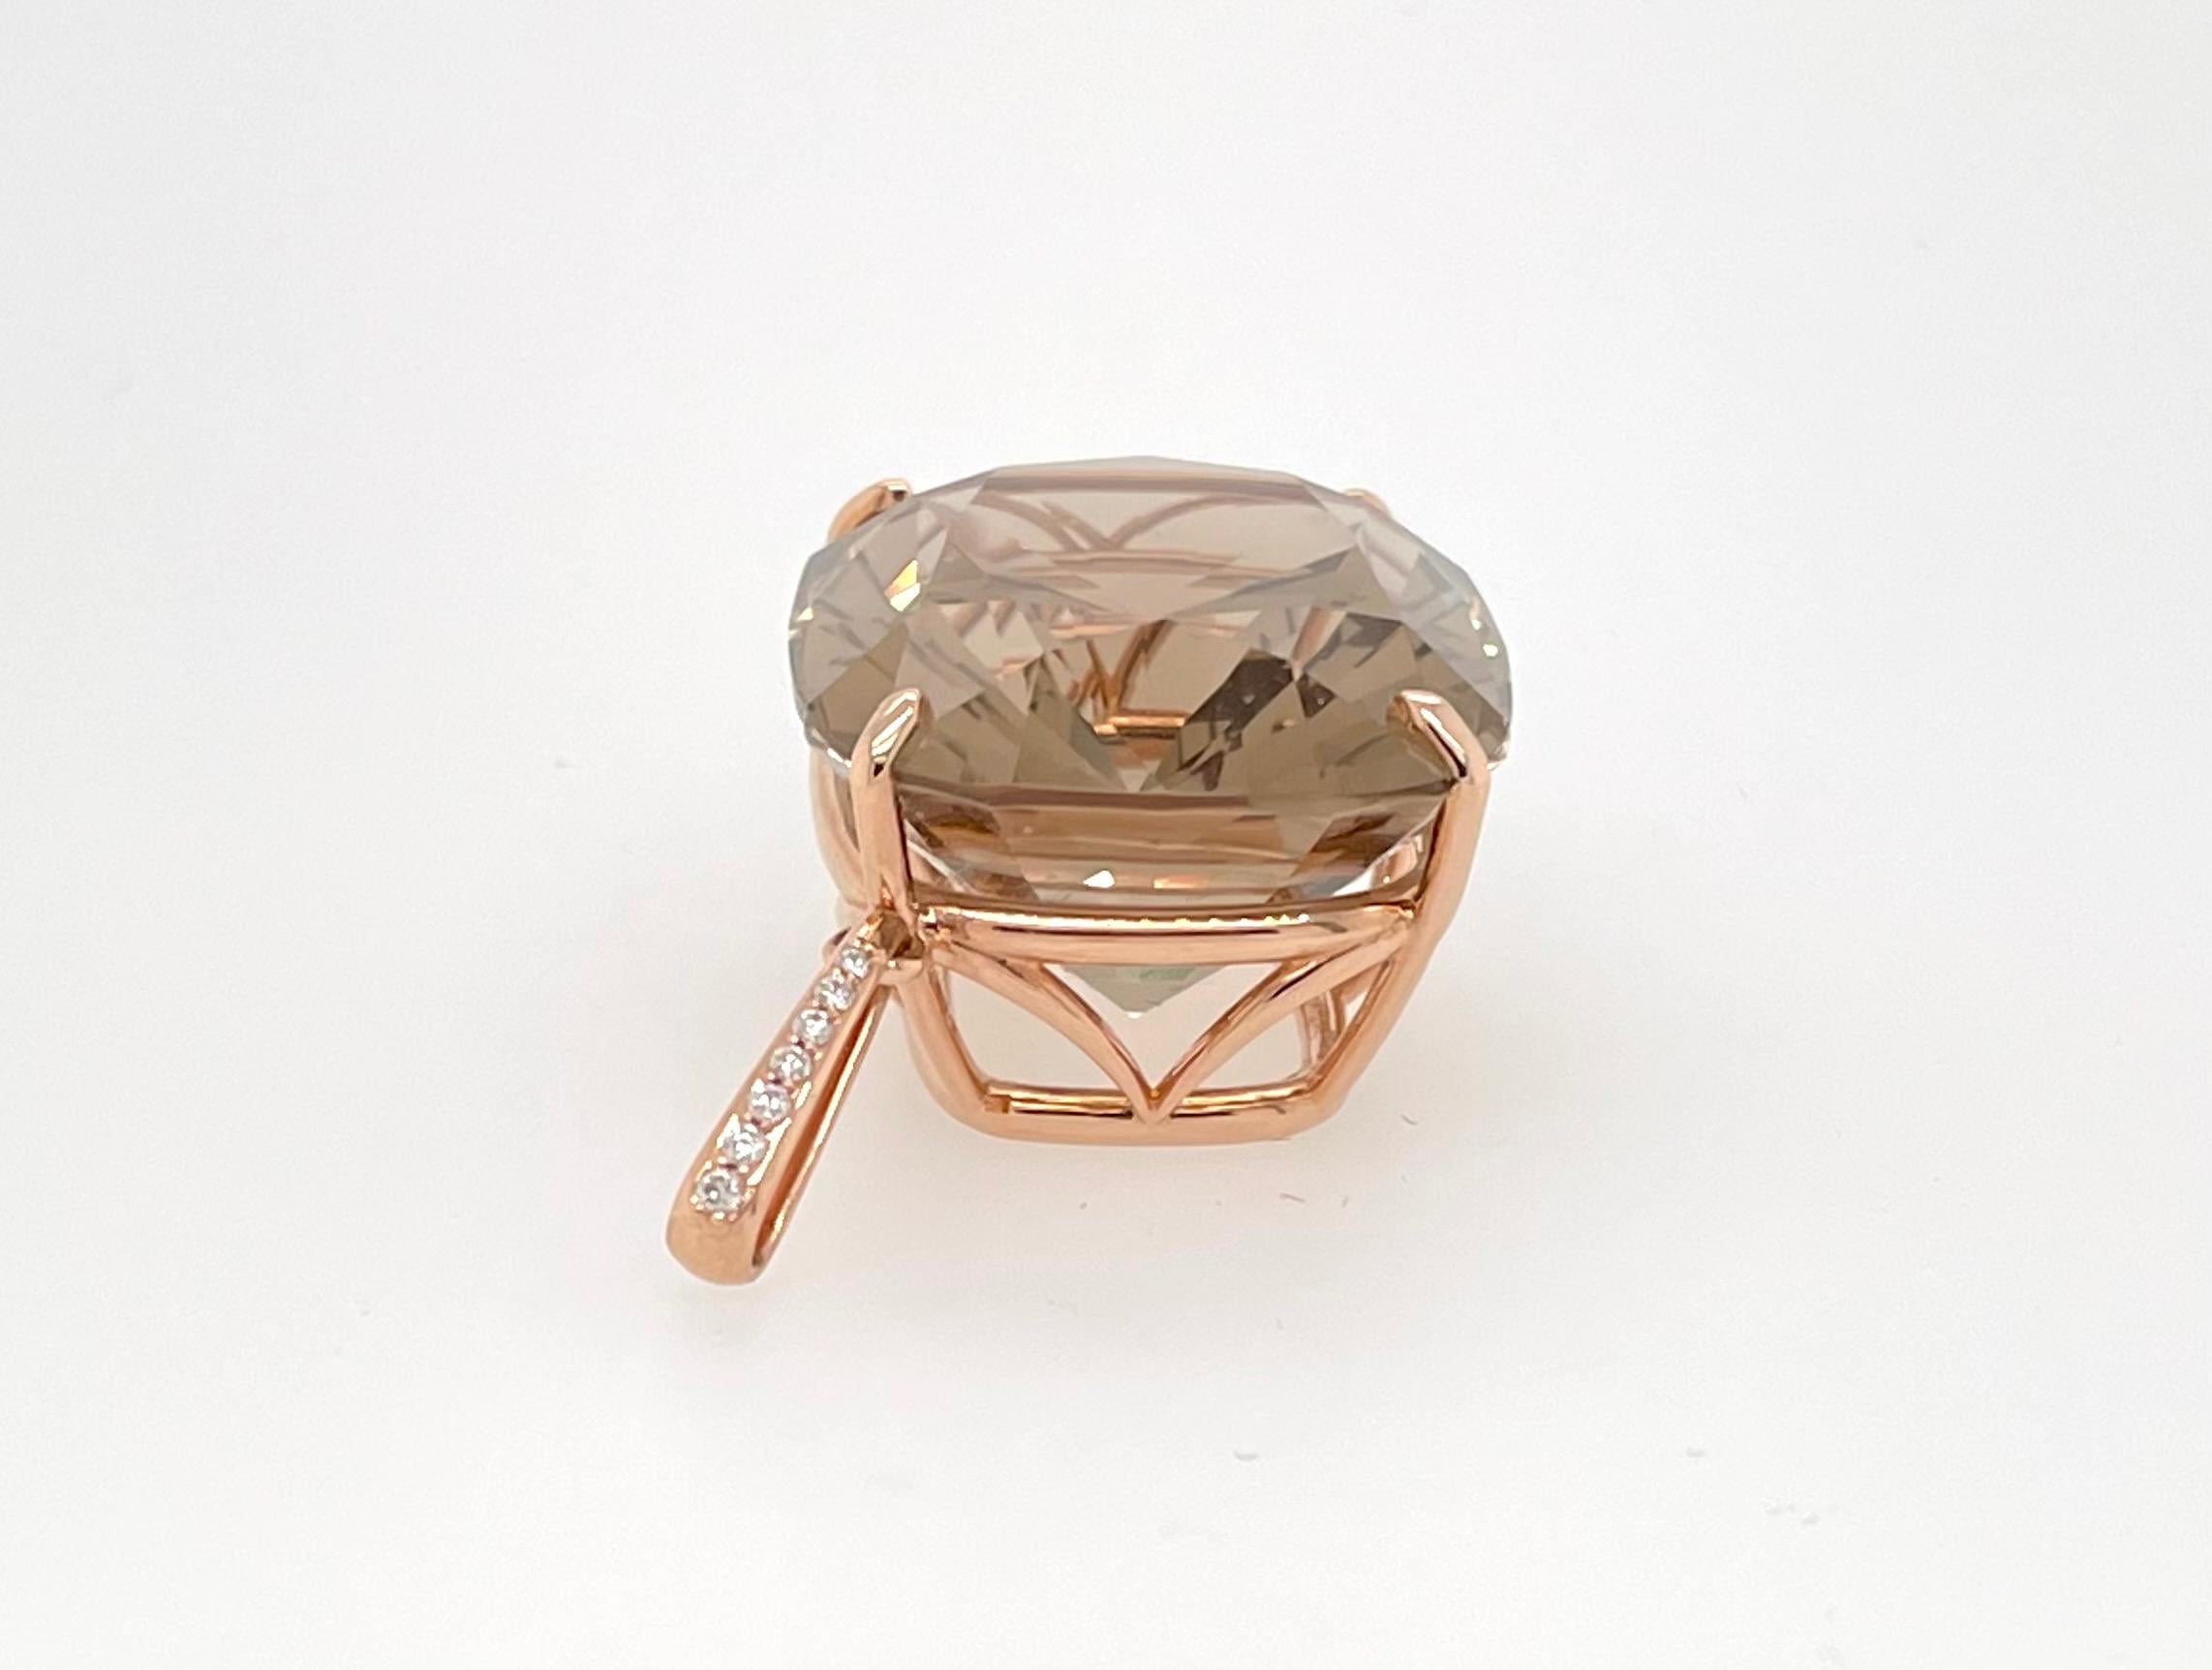 Stunning natural cushion cut smoky topaz by the spectacular gem Cutter Glen Preus.  Glen is a master lapidary and renowned for his work.  This natural, no heat cushion smokey topaz weighs 44.53 carats and is adorned with a 18K heavy Rose Gold